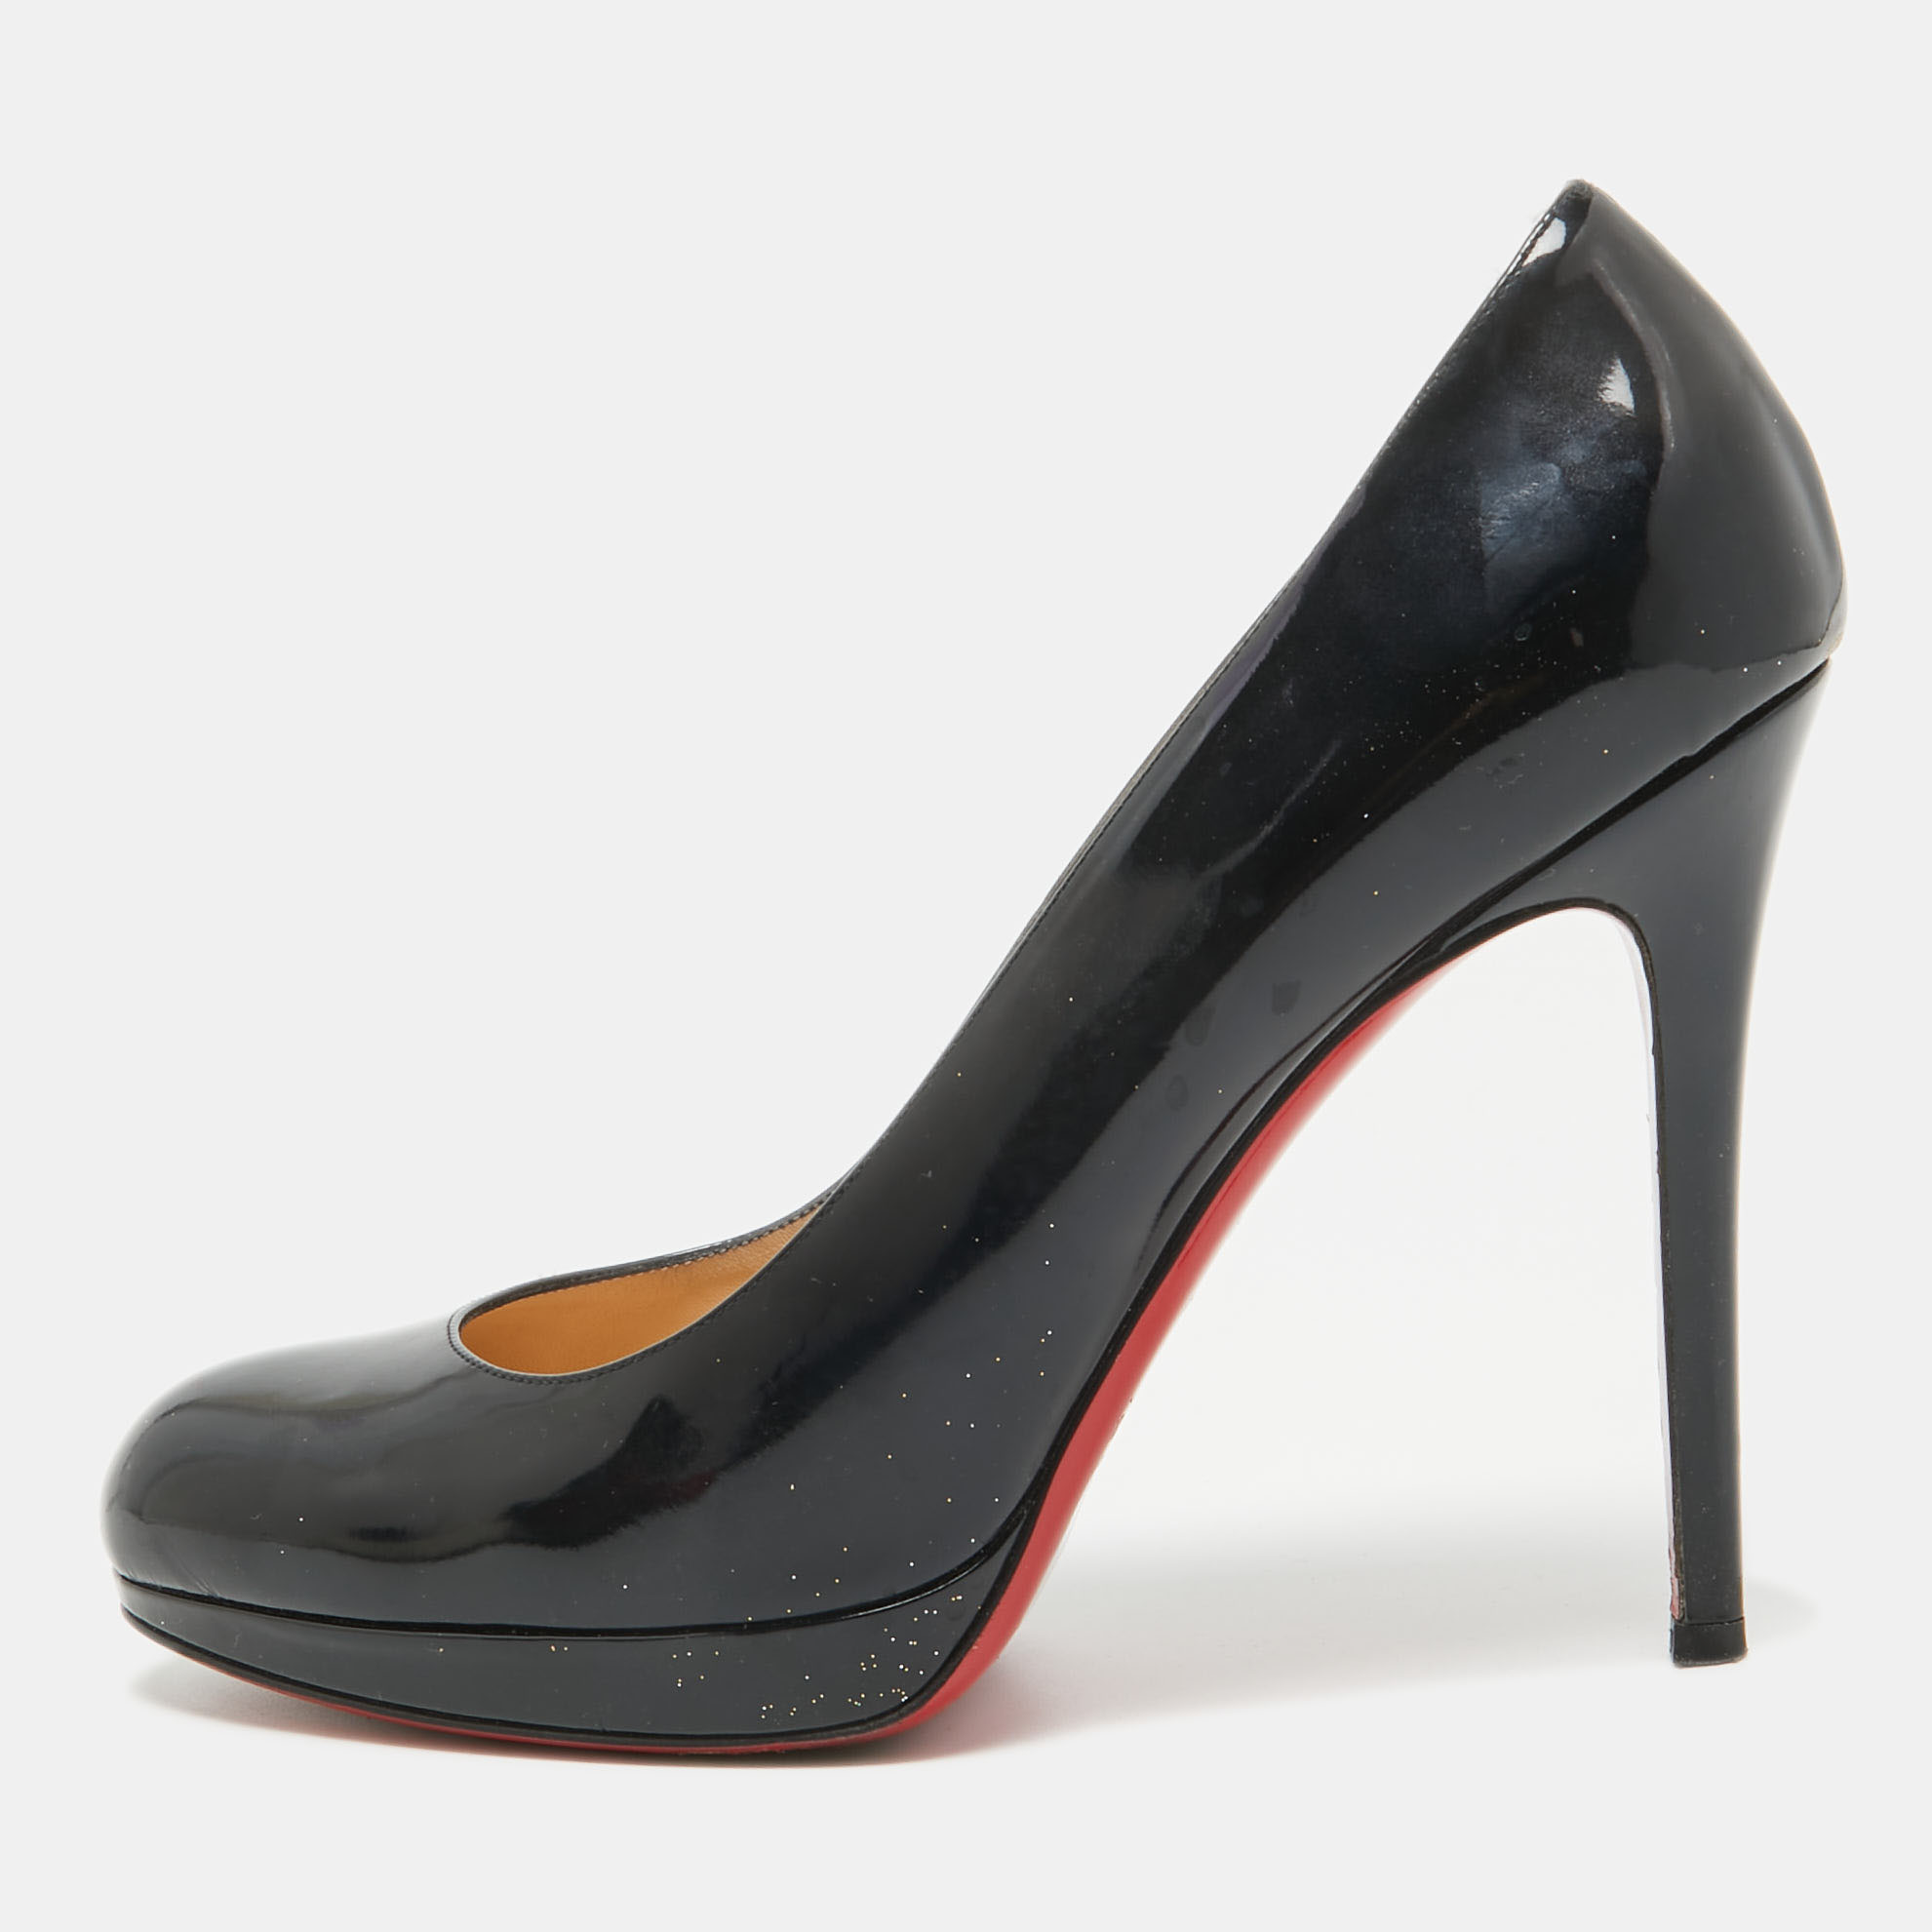 Pre-owned Christian Louboutin Black Patent Leather Bianca Pumps Size 39